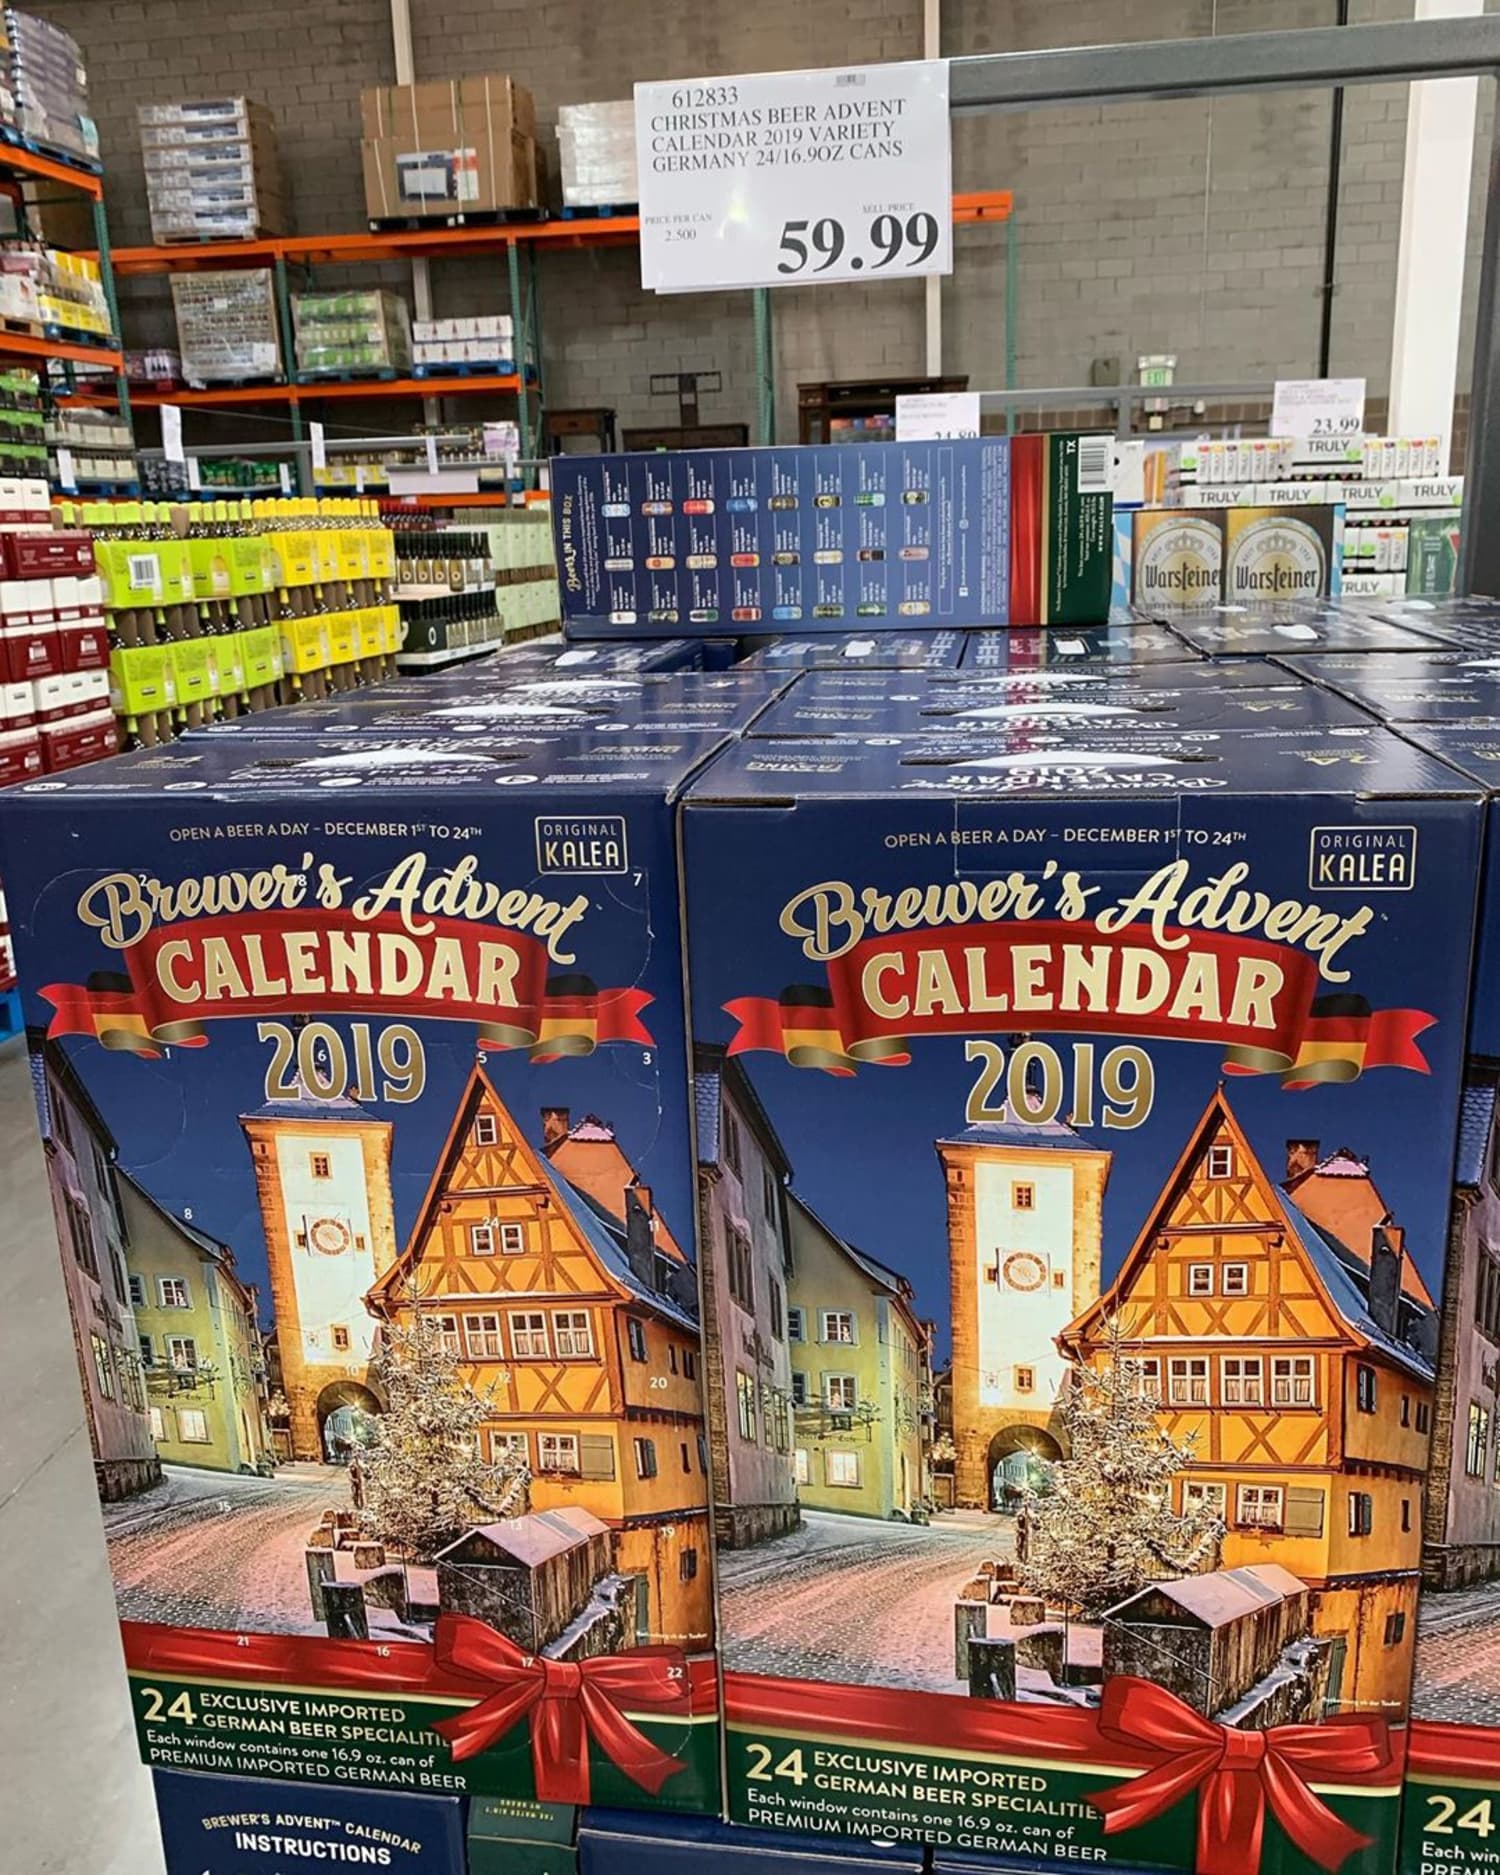 Costco Is Now Selling a German Beer Advent Calendar for the Holidays